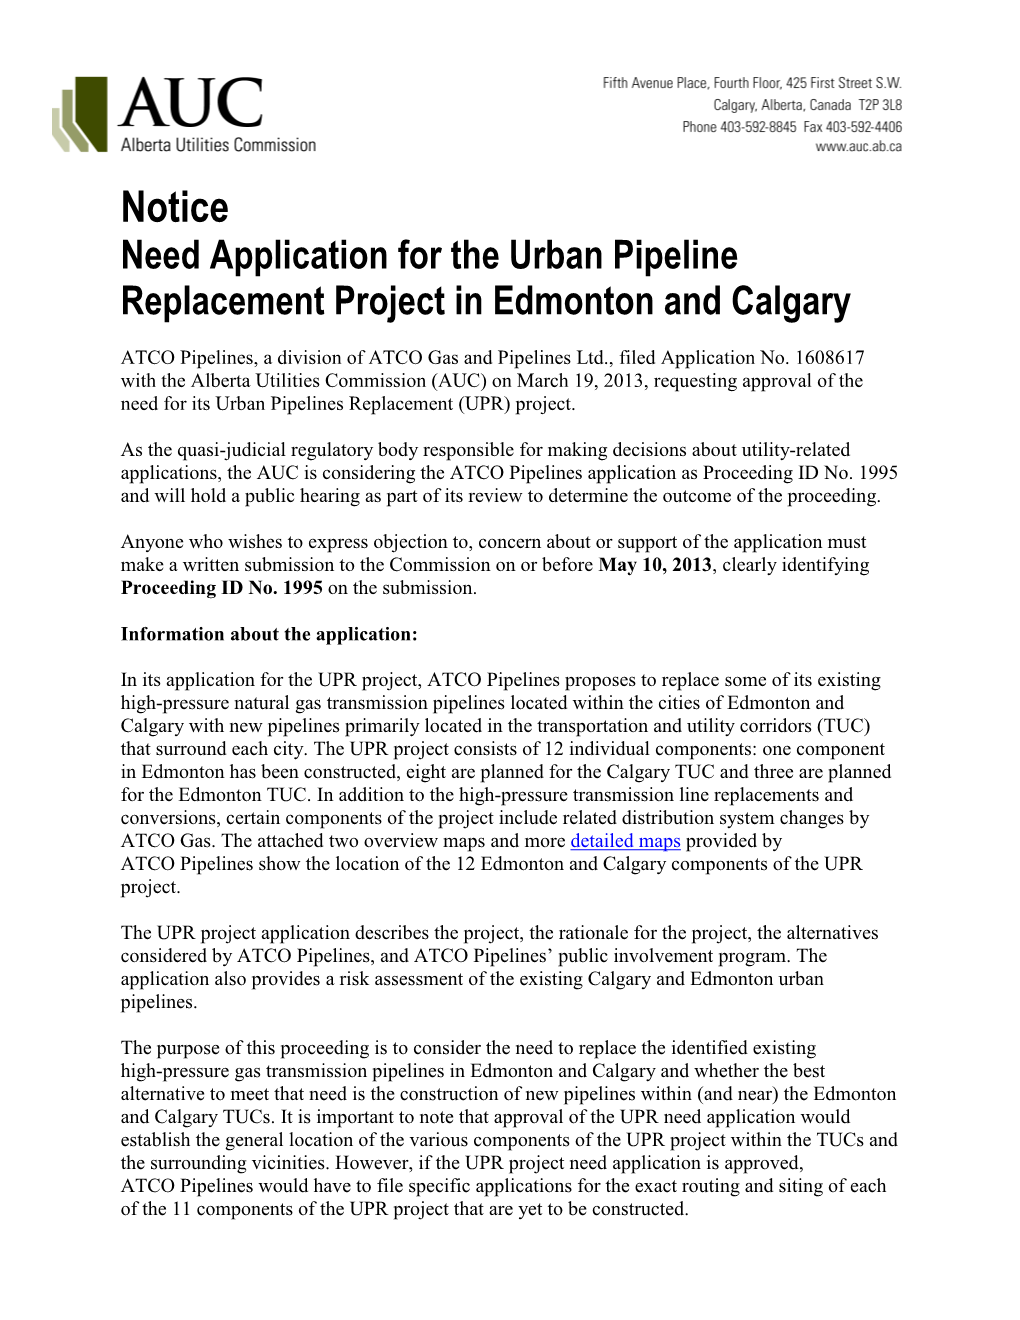 Need Application for the Urban Pipeline Replacement Project in Edmonton and Calgary